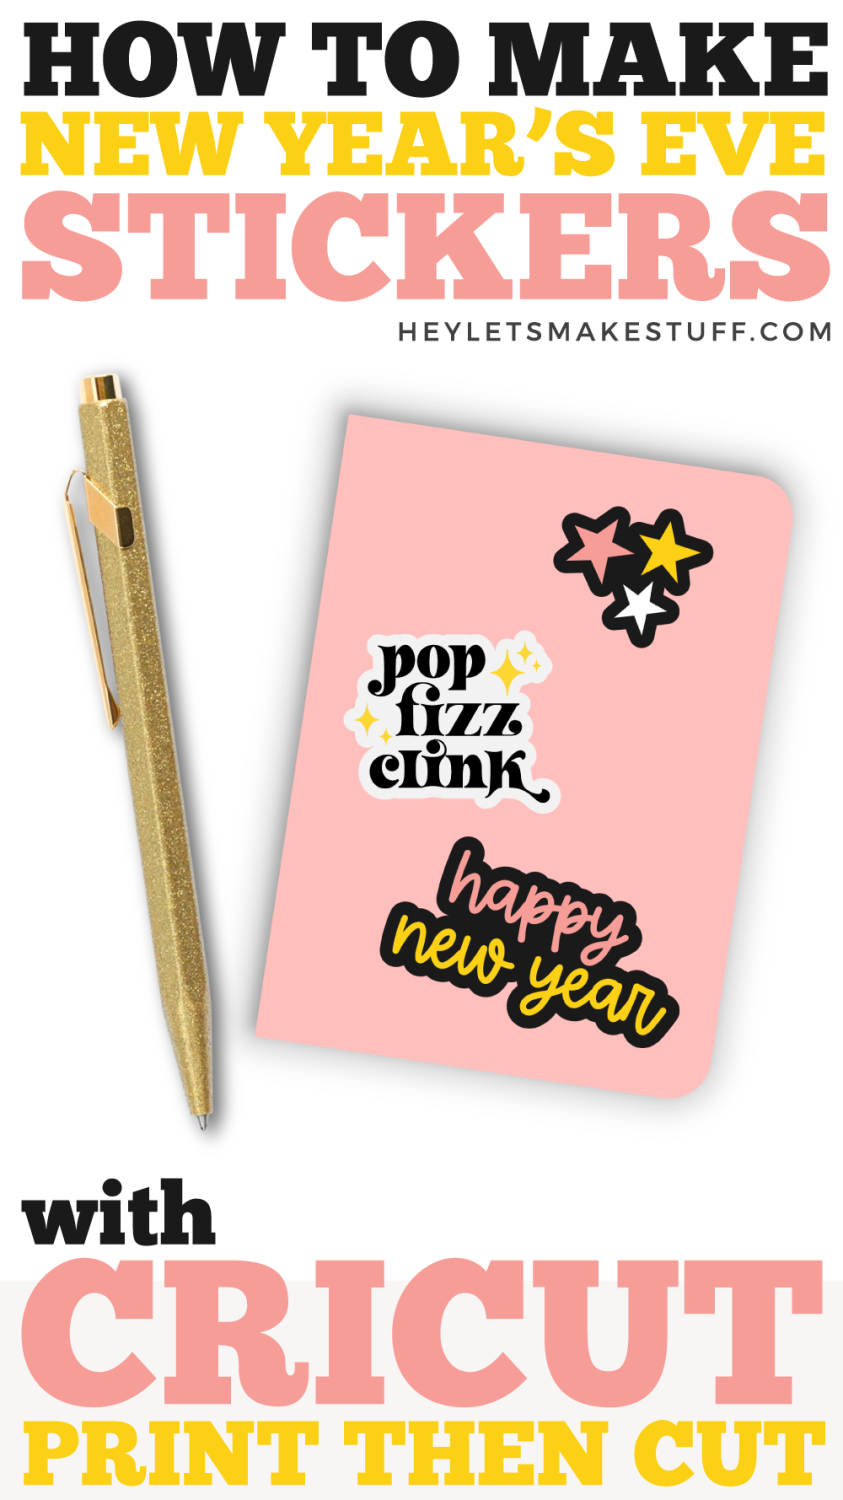 New Year's Eve stickers pin image